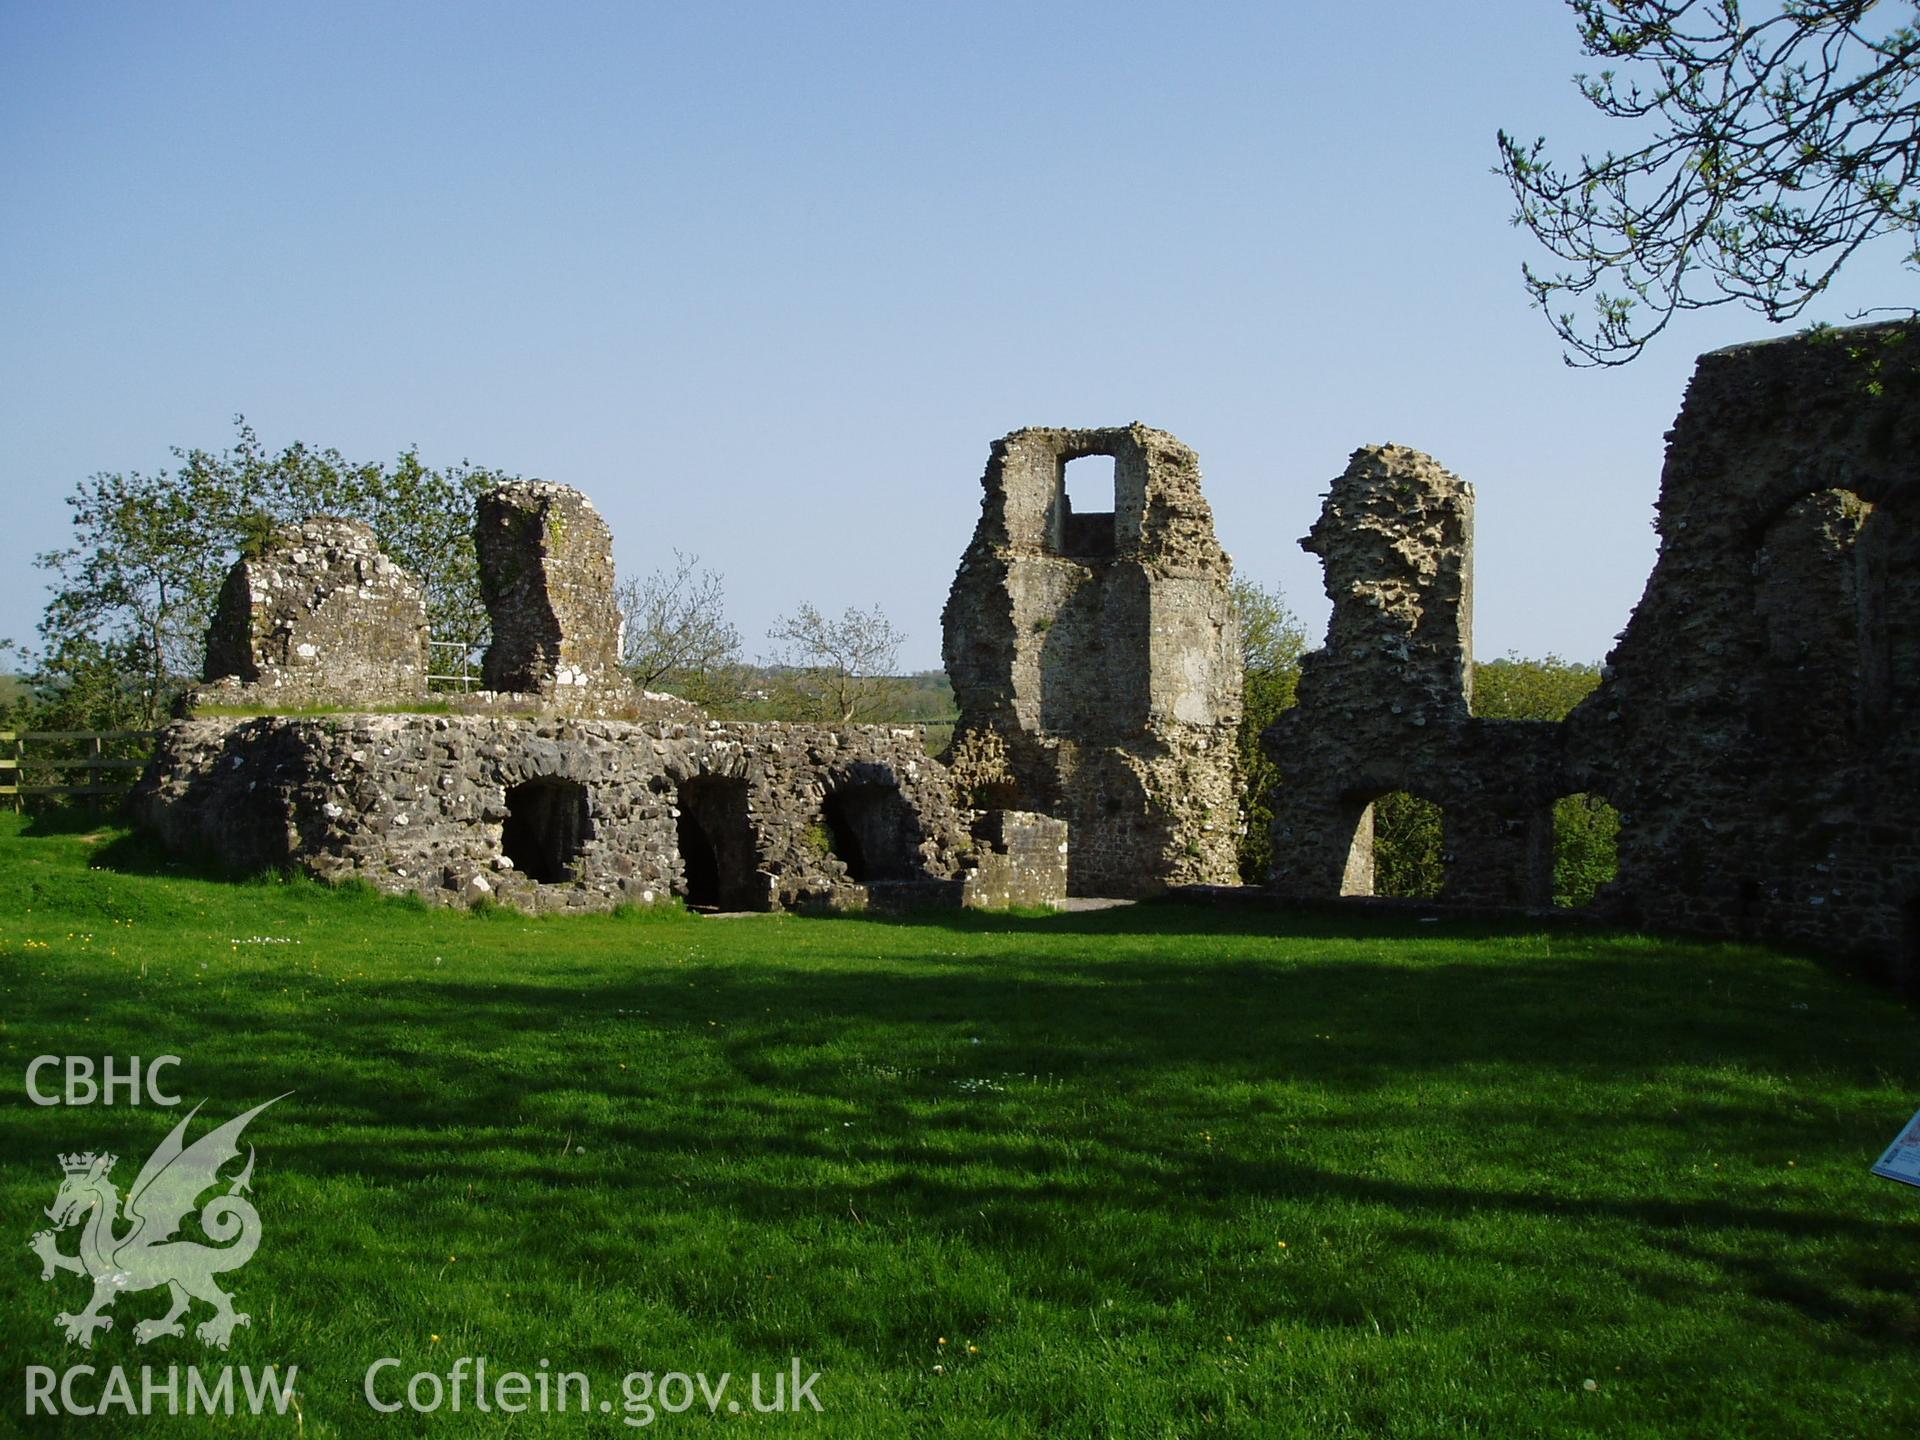 Colour digital photograph showing Narberth Castle taken by Phil Kingdom, 2008.